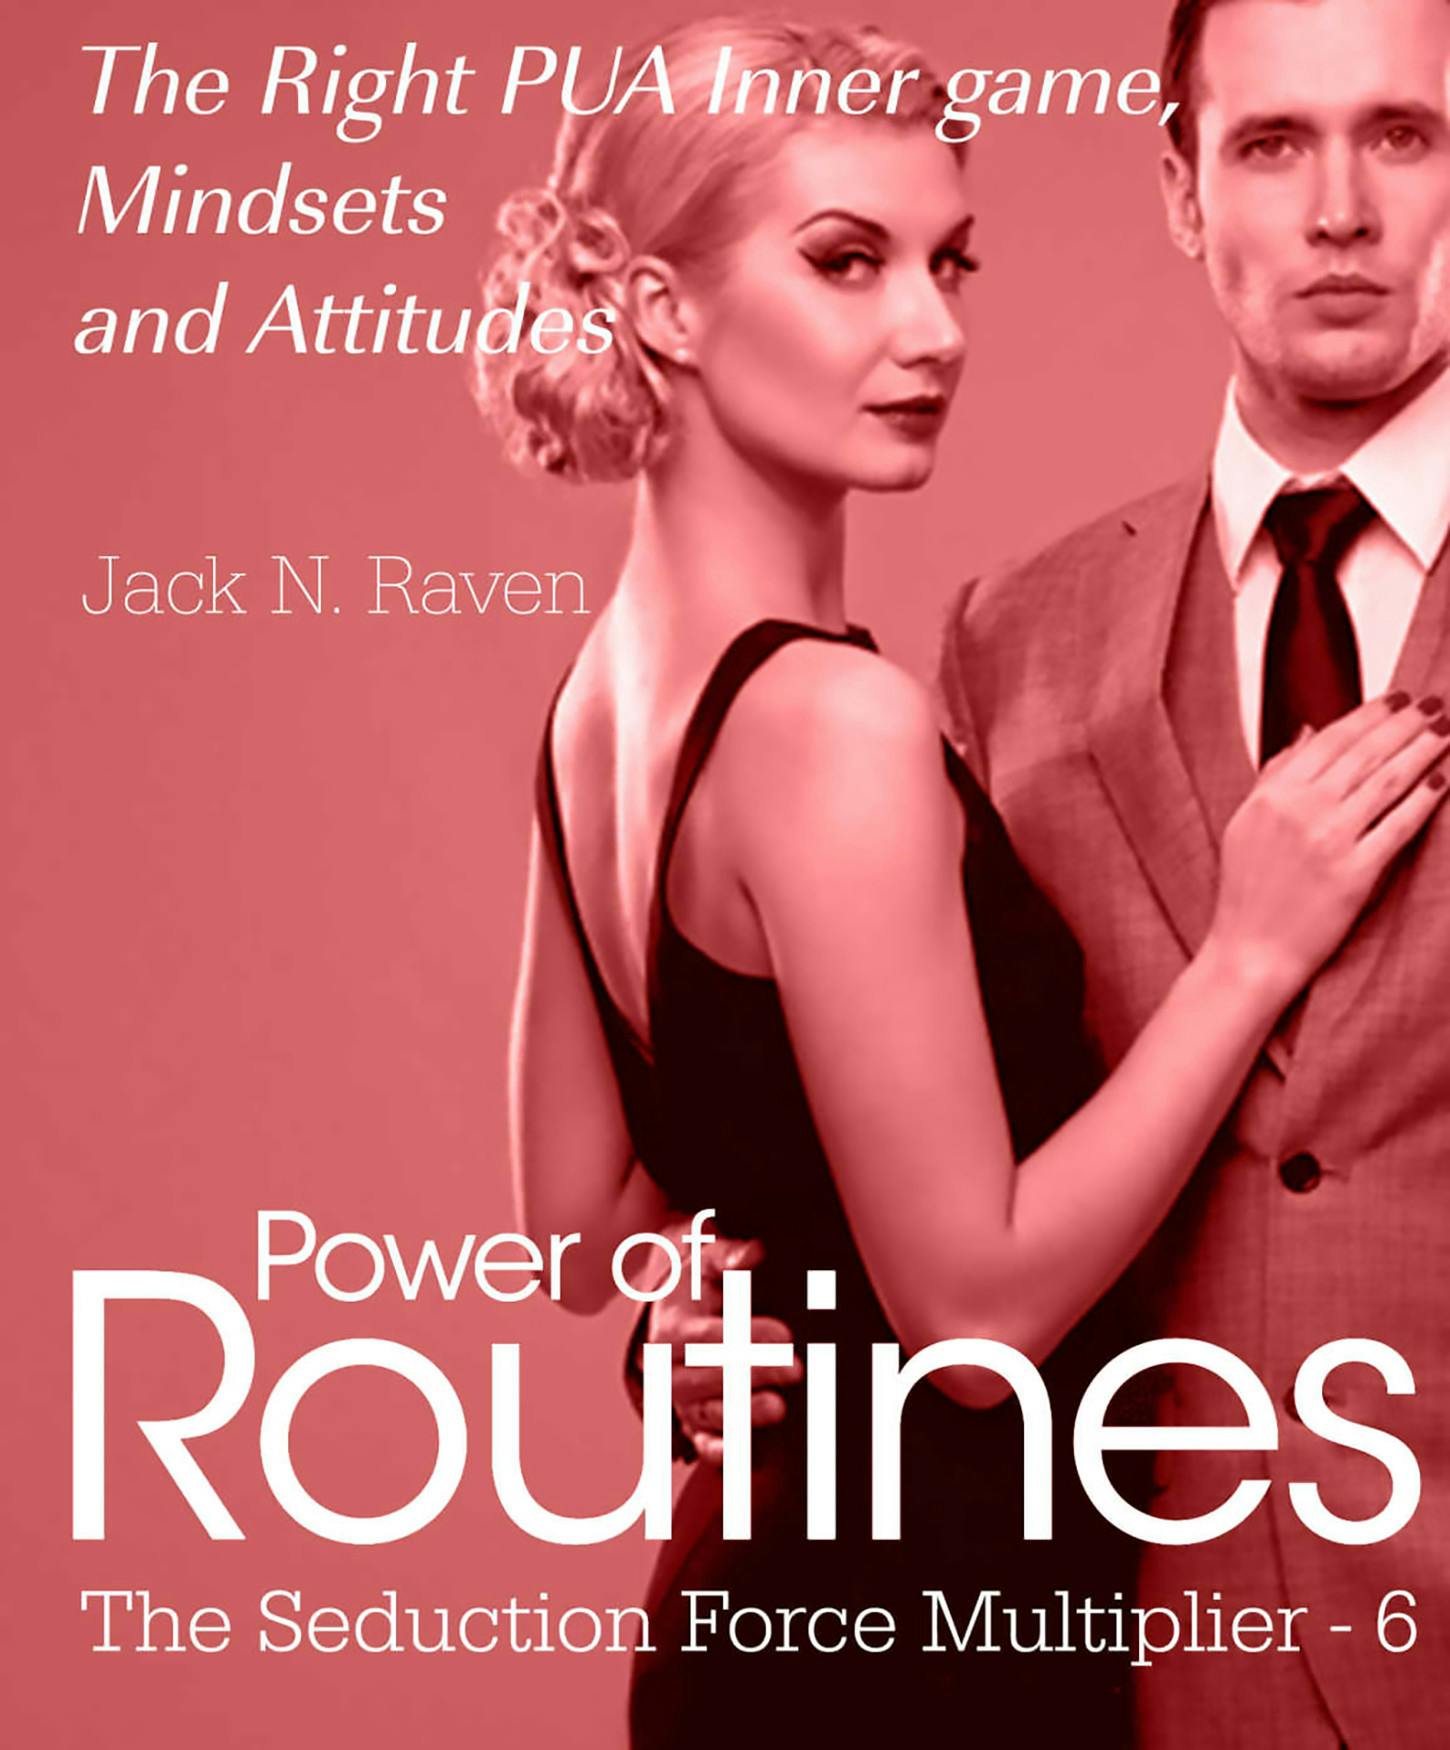 Seduction Force Multiplier 6: Power of Routines - The Right PUA Inner game , Mindsets and Attitudes! - Jack N. Raven